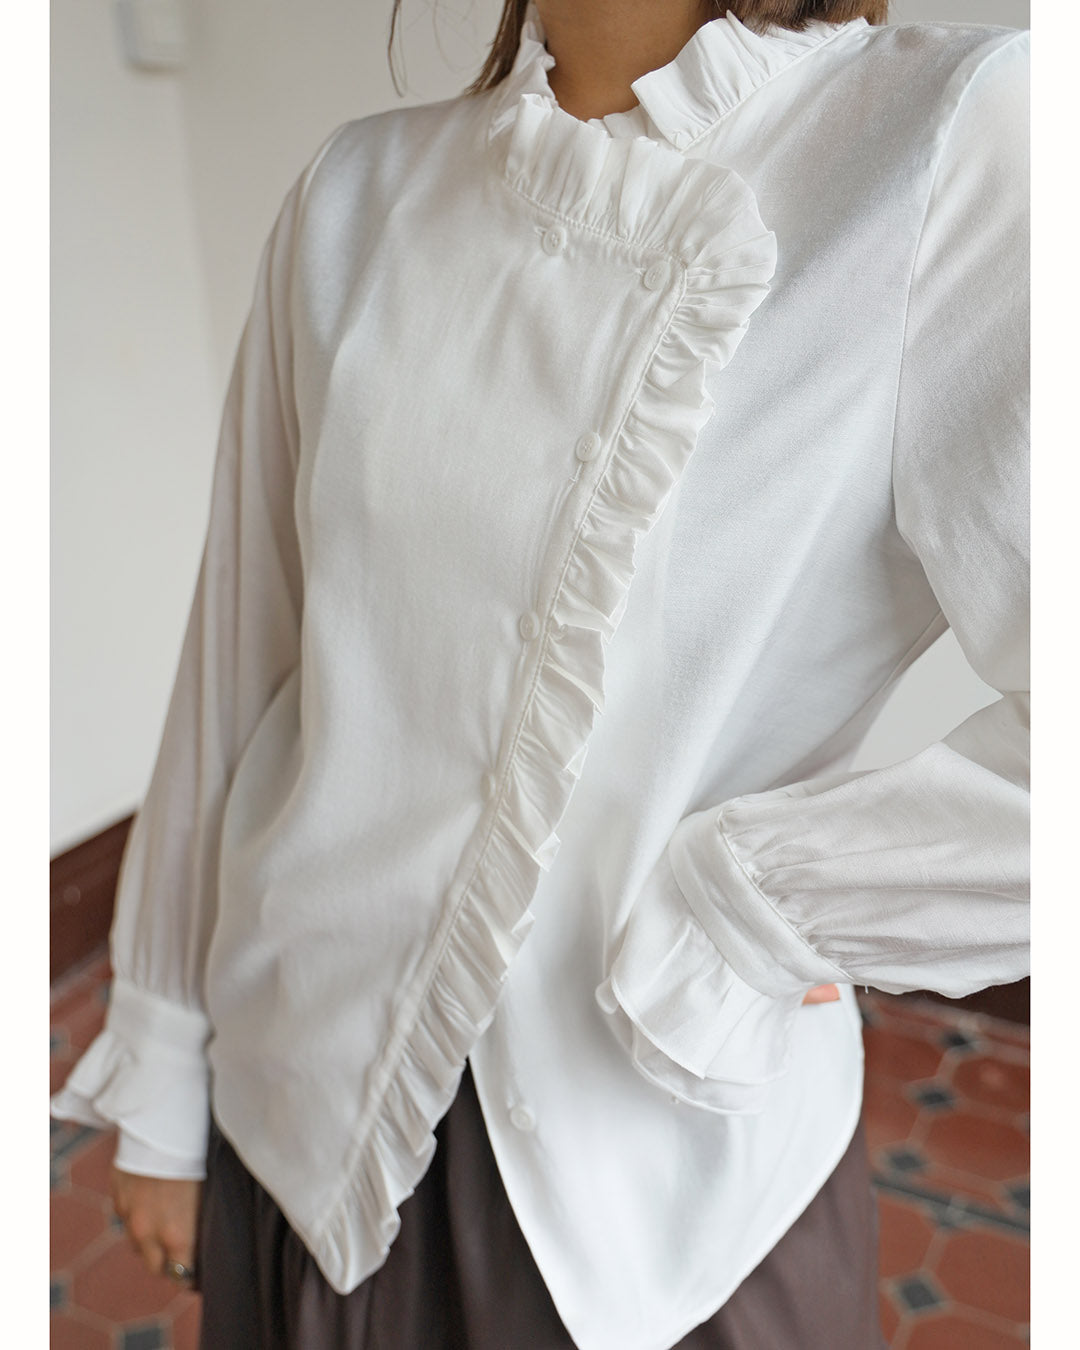 Ruffle Trimmed Blouse